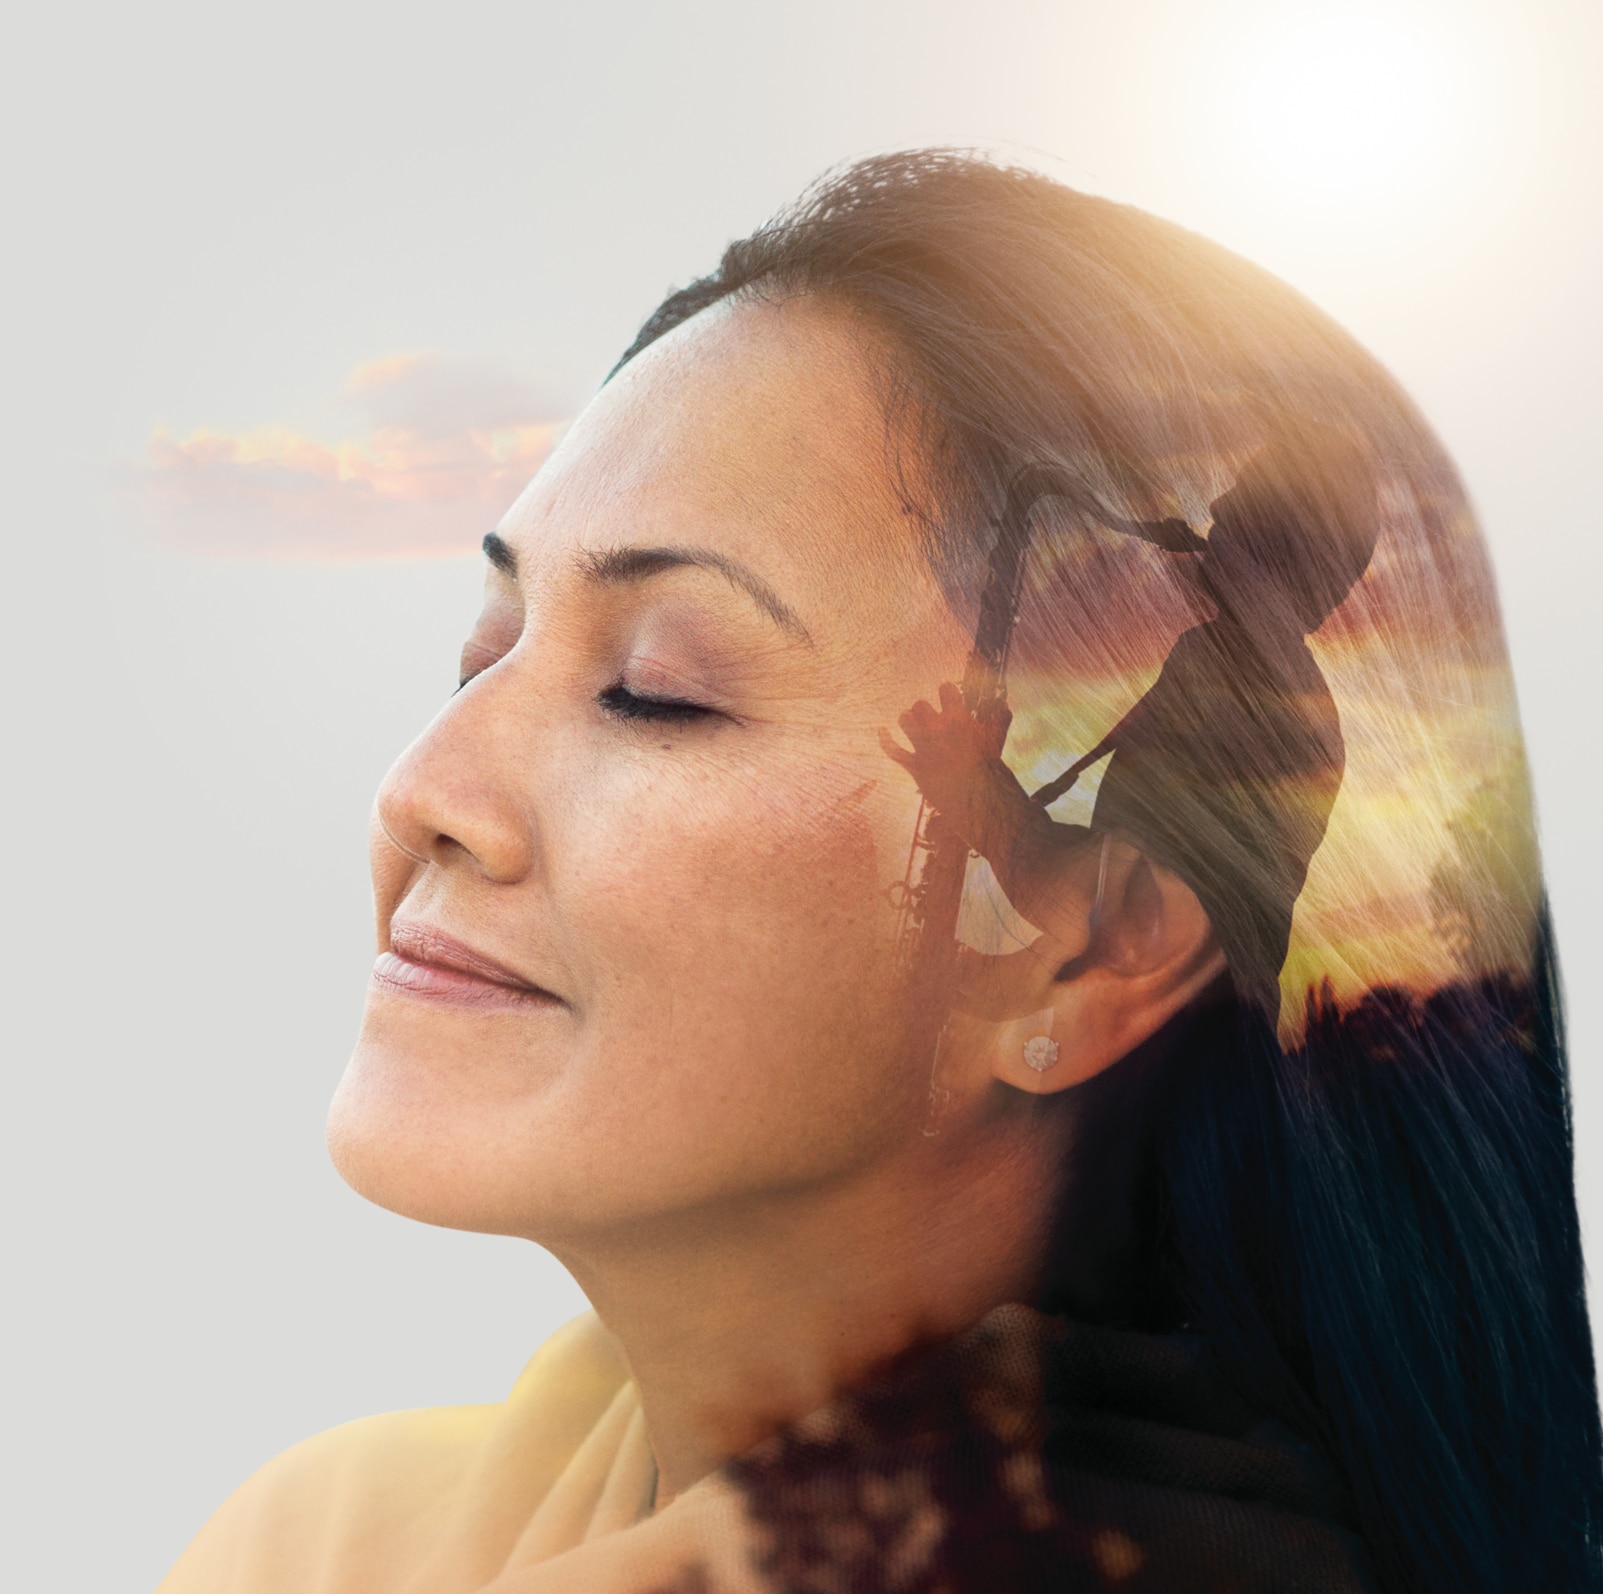 Concept image - relaxed woman's face mixed with a saxophonist's silhouette.